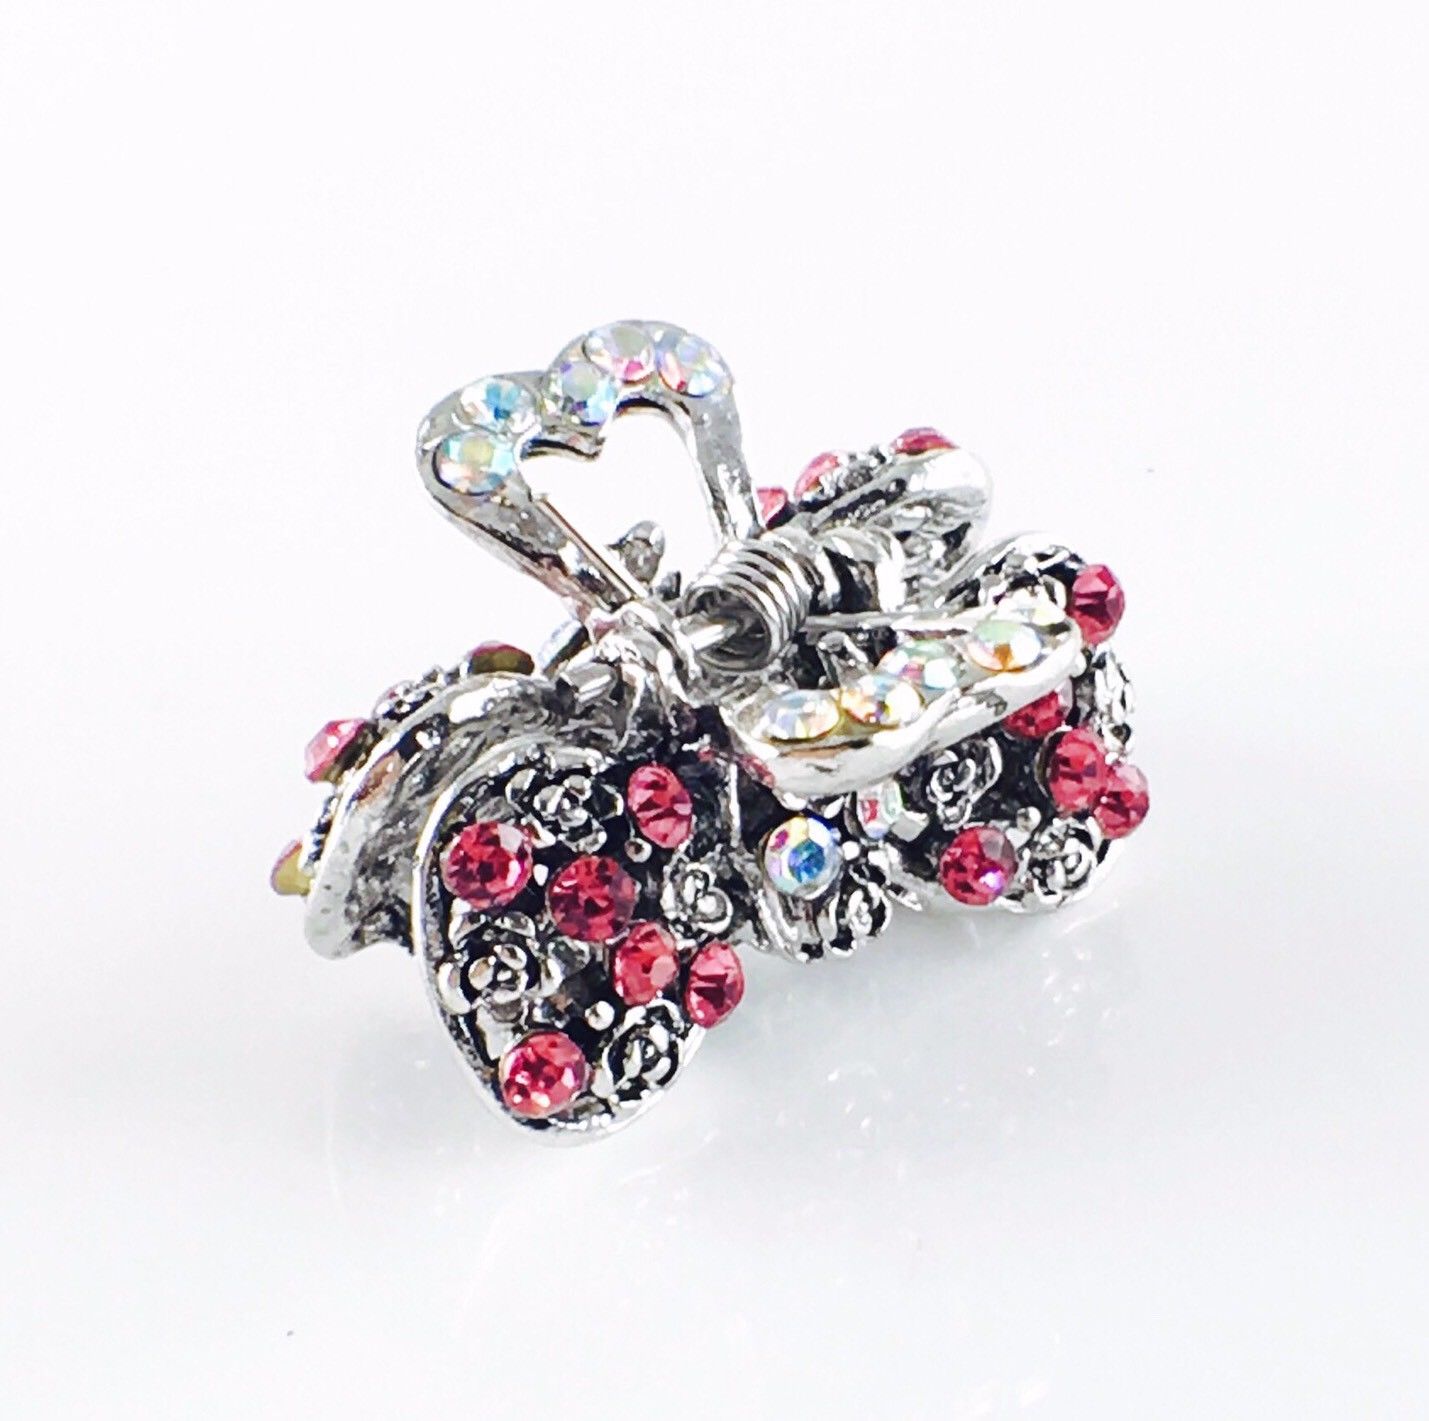 Roses Bow Knot Hair Claw Jaw Clip use Rhinestone Crystal Silver base Pink, Hair Claw - MOGHANT